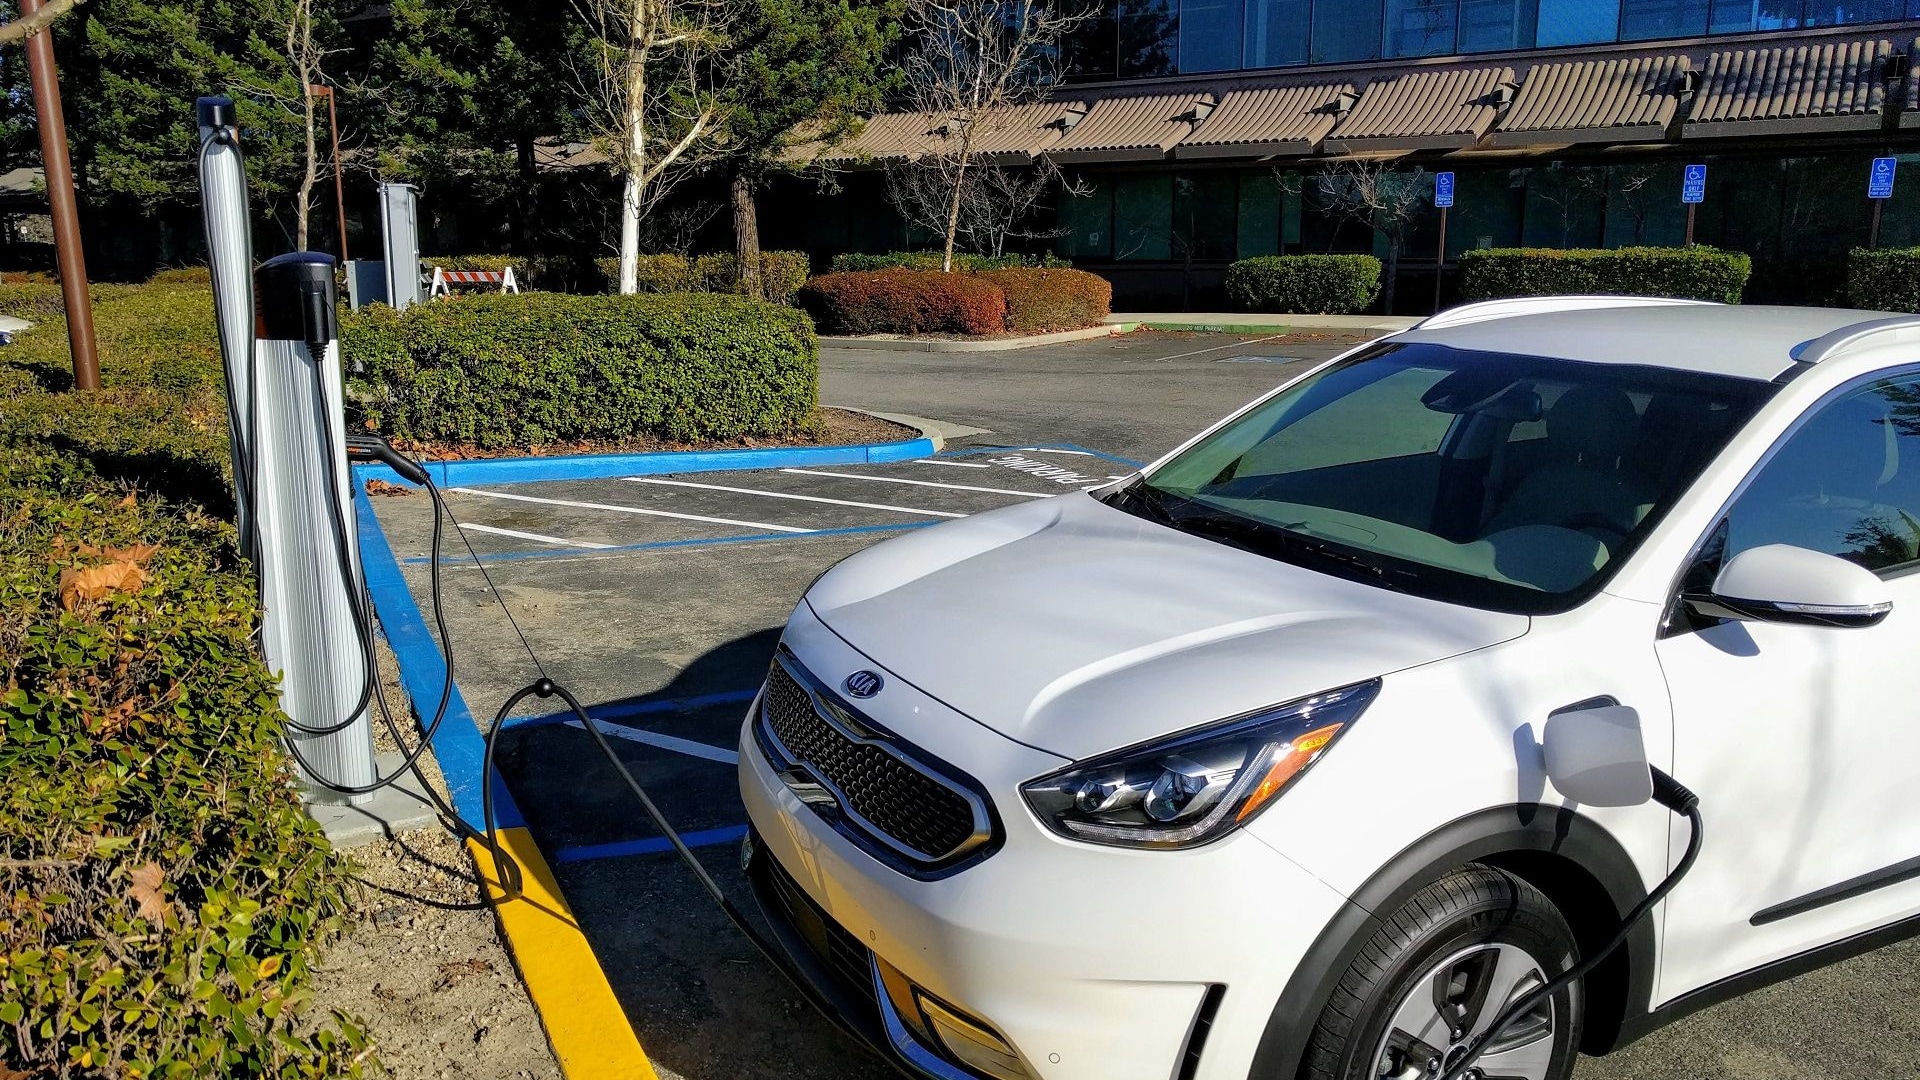 electric vehicle charging only plug in hybrid